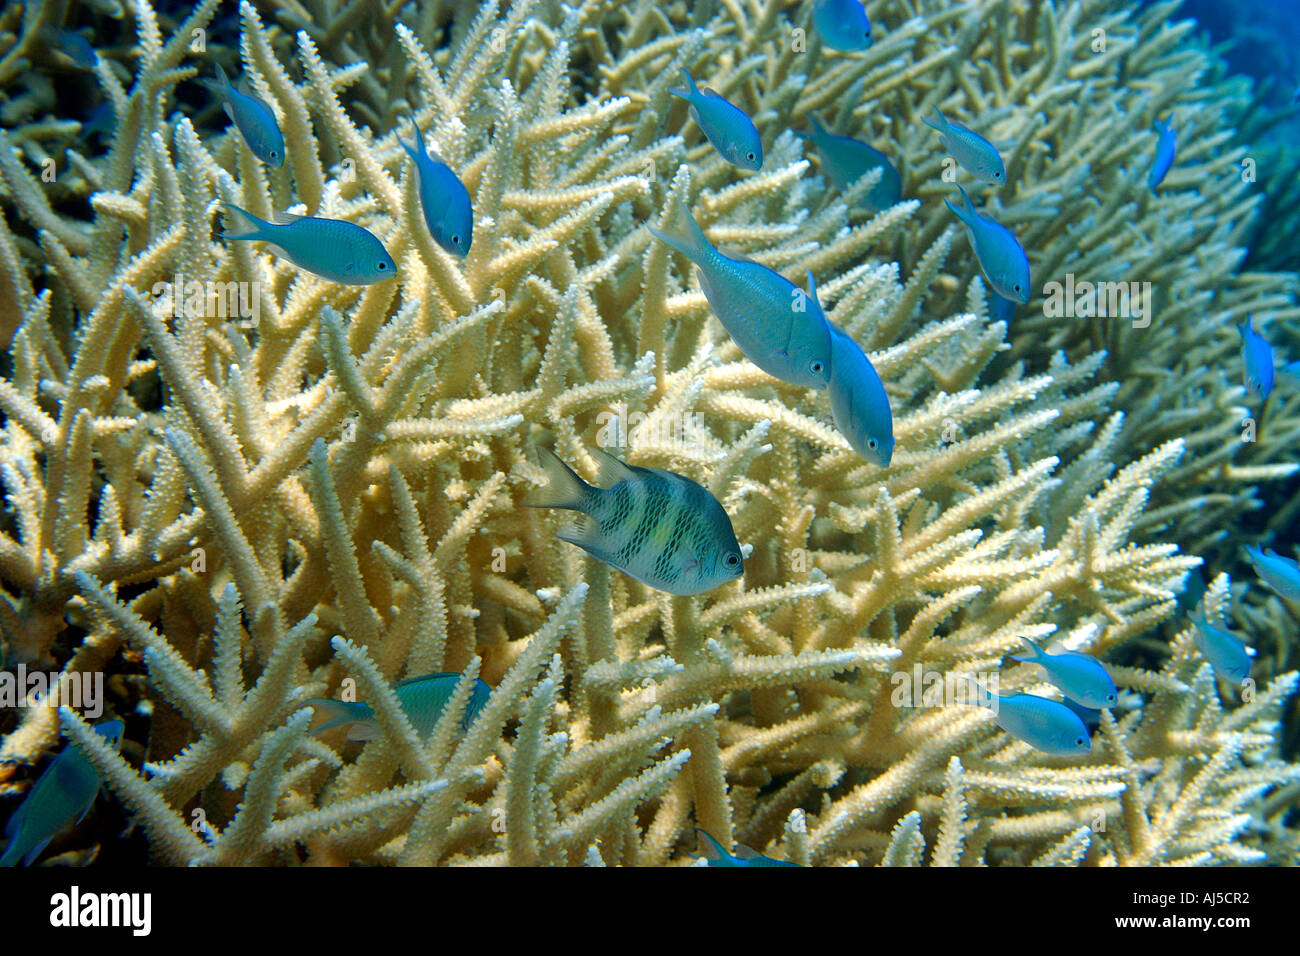 Blue green chromis Chromis viridis sheltered within branches of staghorn coral Acropora sp Ailuk atoll Marshall Islands Pacific Stock Photo